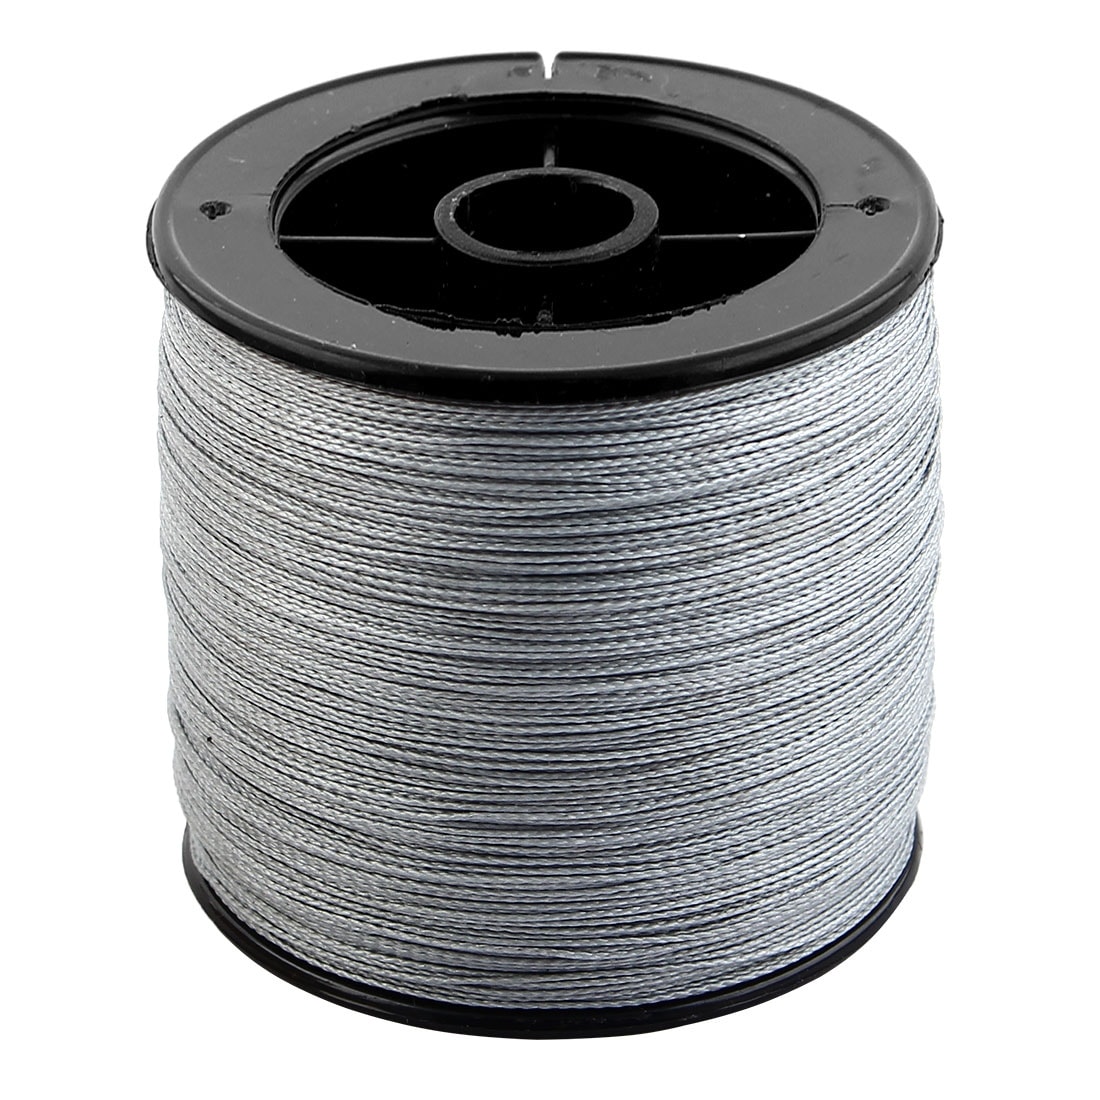 https://ak1.ostkcdn.com/images/products/is/images/direct/1dc0f91045dfd3d5718b76119a933be01f2e2b11/Braided-Fishing-Line-Beading-Thread-Cord-Gray-0.4mm-Dia.jpg